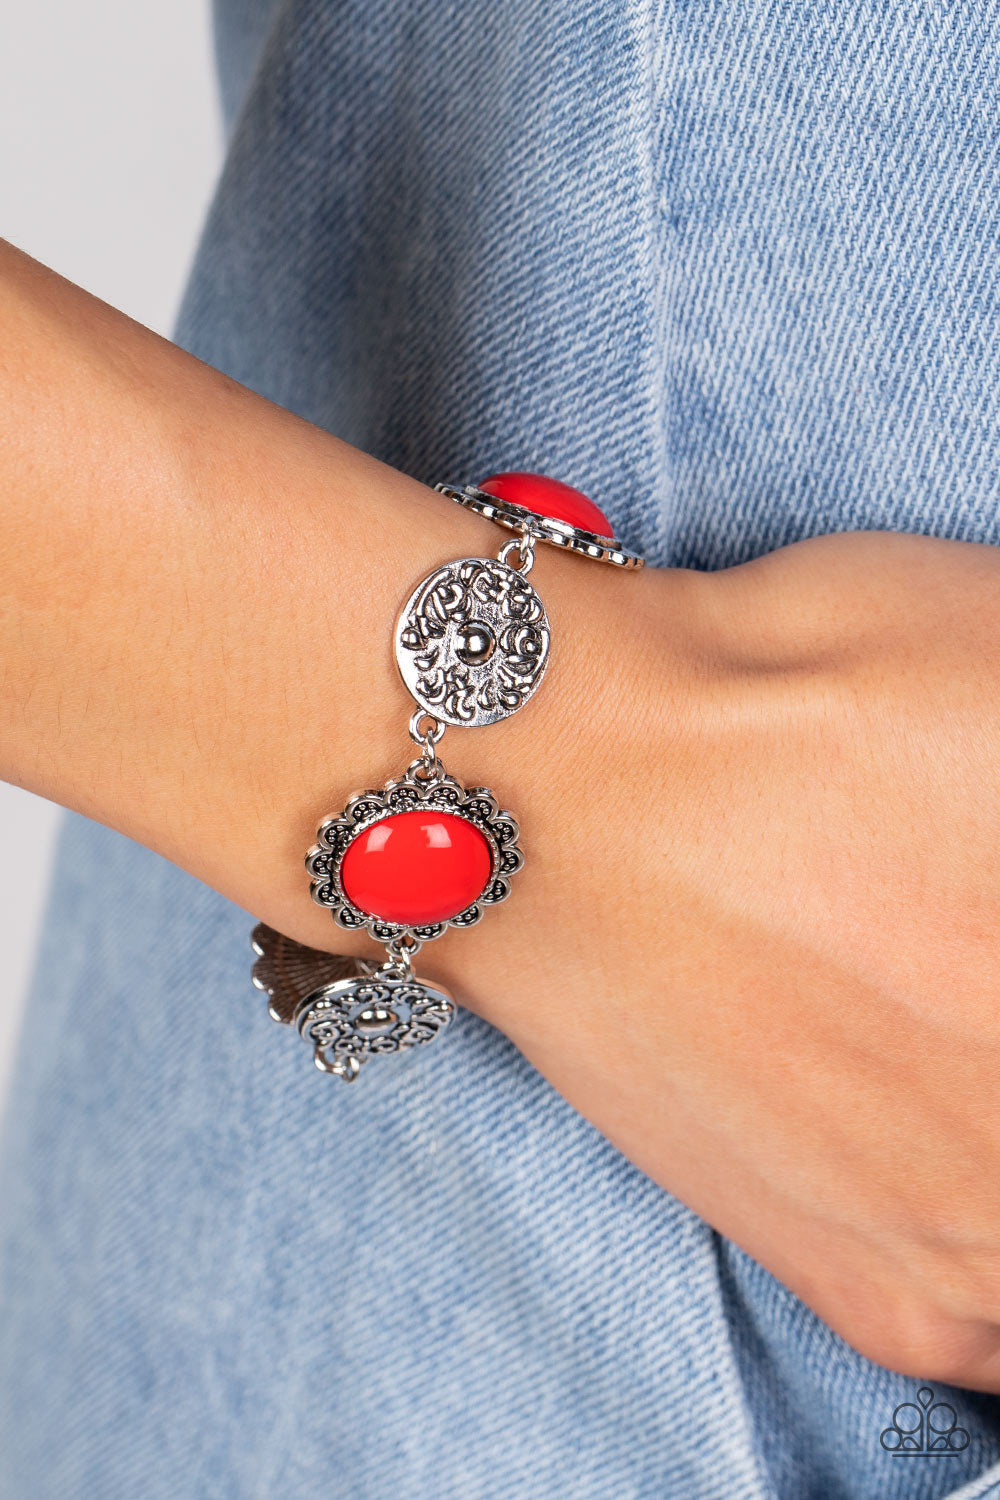 Positively Poppy - Red and Silver Bracelet - Paparazzi Accessories - Shiny oversized red beads are wrapped in floral-inspired frames of silver, filled with studded texture. Silver discs embossed in a filigree motif alternate with the vibrant beads as they link around the wrist in a whimsical finish. Features an adjustable clasp closure.